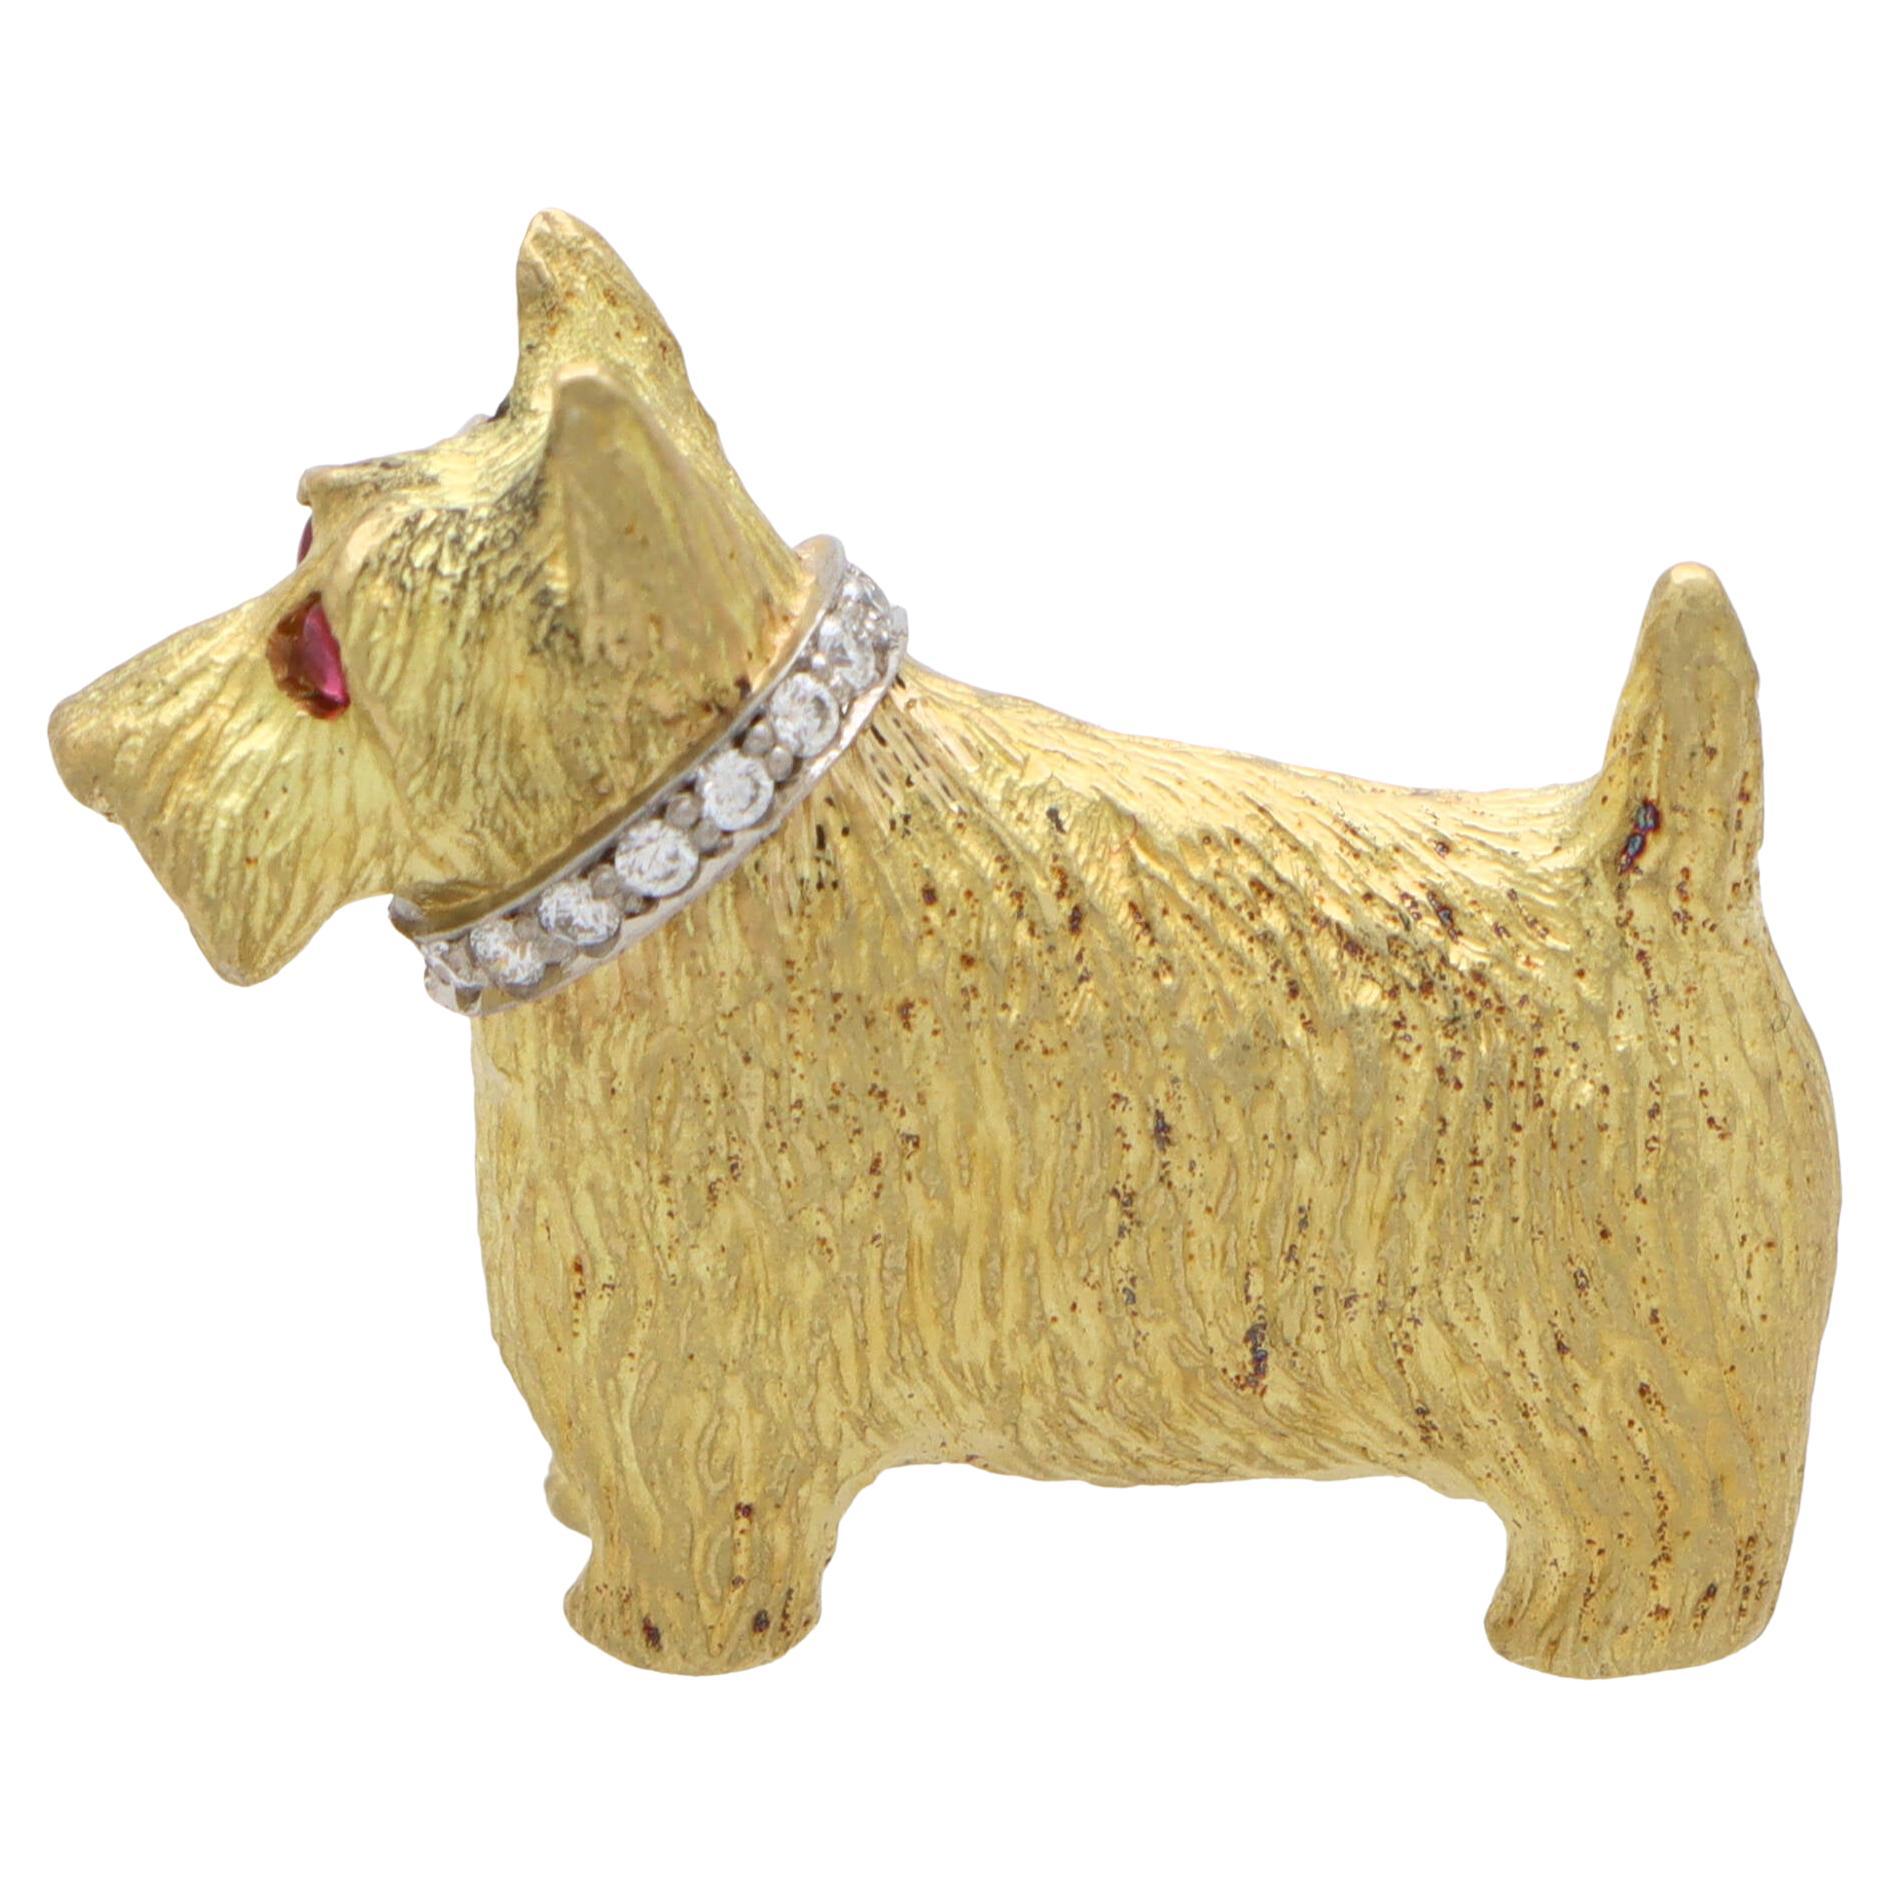 Ruby and Diamond Scottish Terrier Pin Brooch et in 18k Yellow Gold